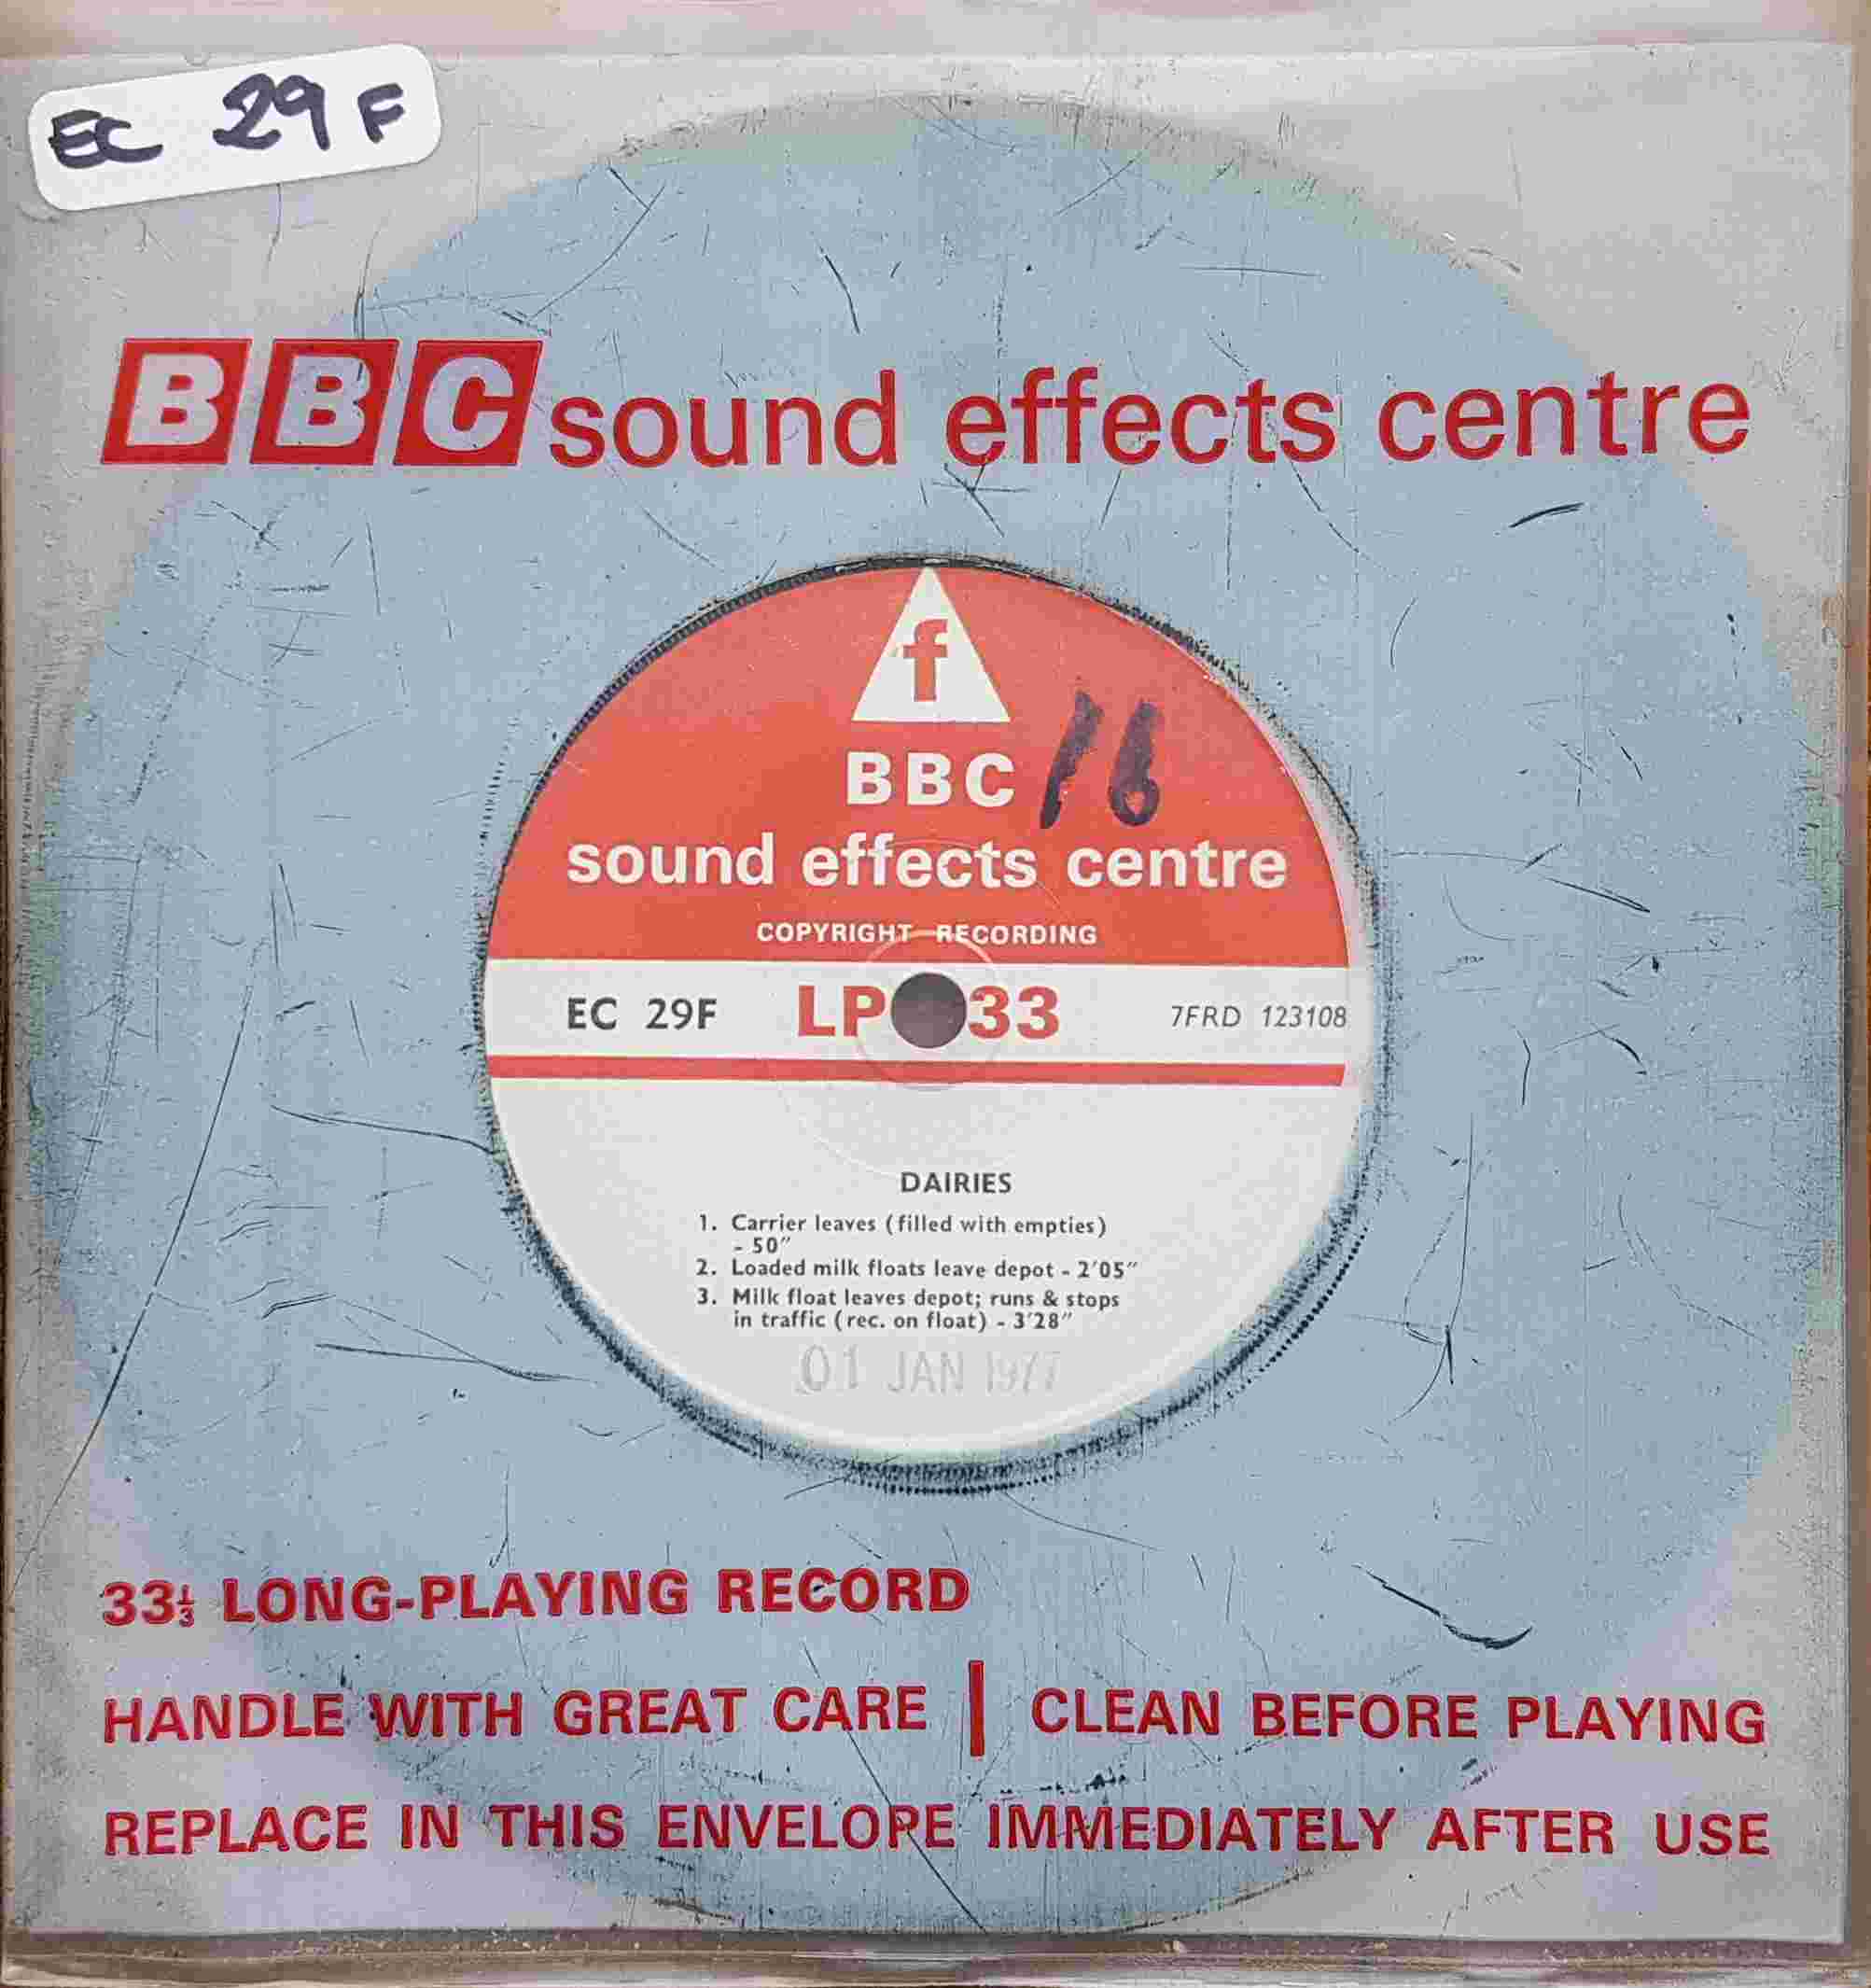 Picture of EC 29F Dairies by artist Not registered from the BBC singles - Records and Tapes library